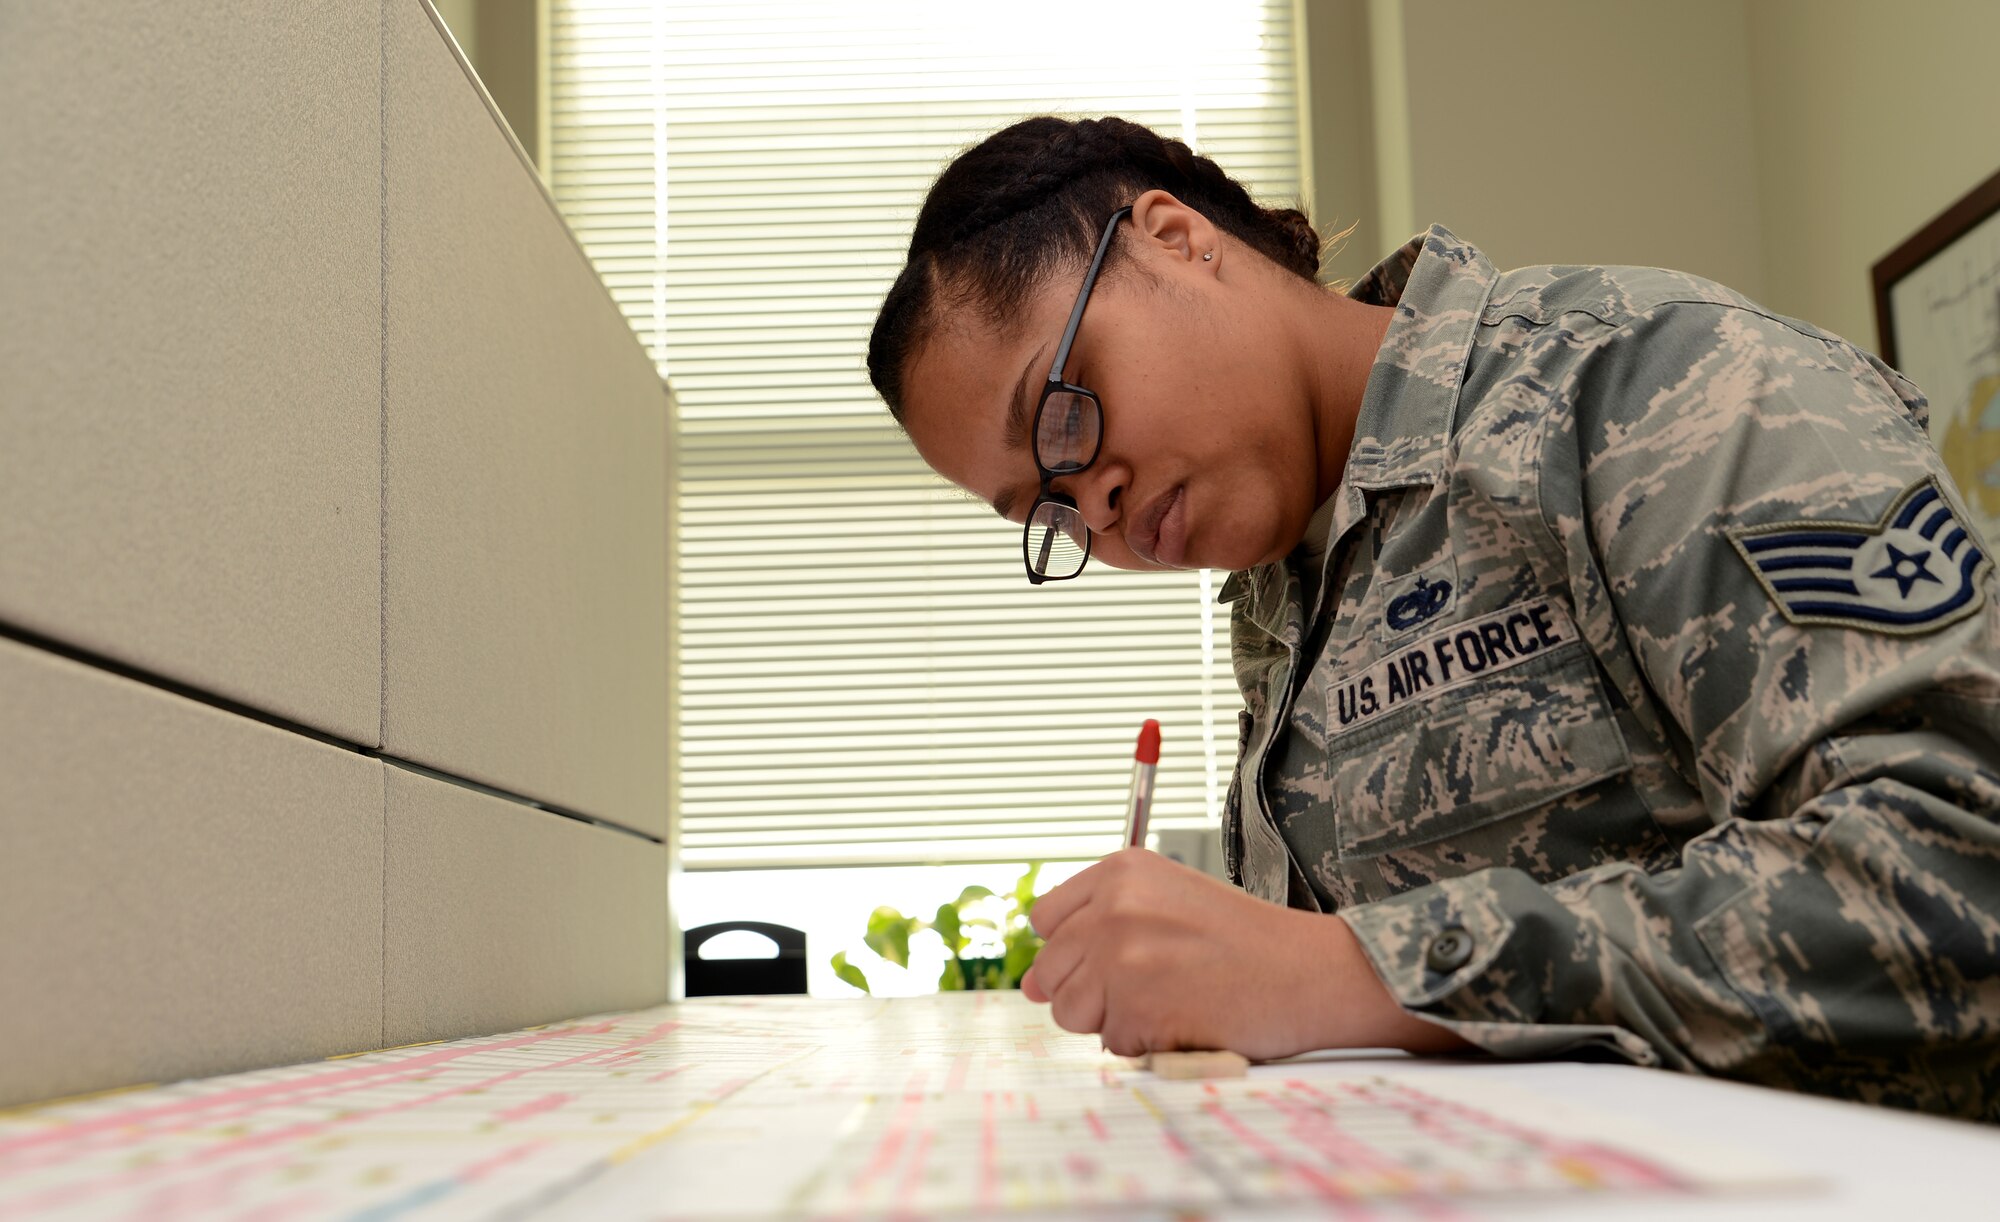 Staff Sgt. Kursten Harris, 62nd Maintenance Group plans, scheduling and documentation office NCO in charge, reviews schedules Feb. 22, 2017 at Joint Base Lewis-McChord, Wash. The 62nd MXG plans, scheduling and documentation office schedules hundreds of maintenance actions yearly for aircraft and track past, current and future maintenance actions. (U.S. Air Force photo/Senior Airman Jacob Jimenez)